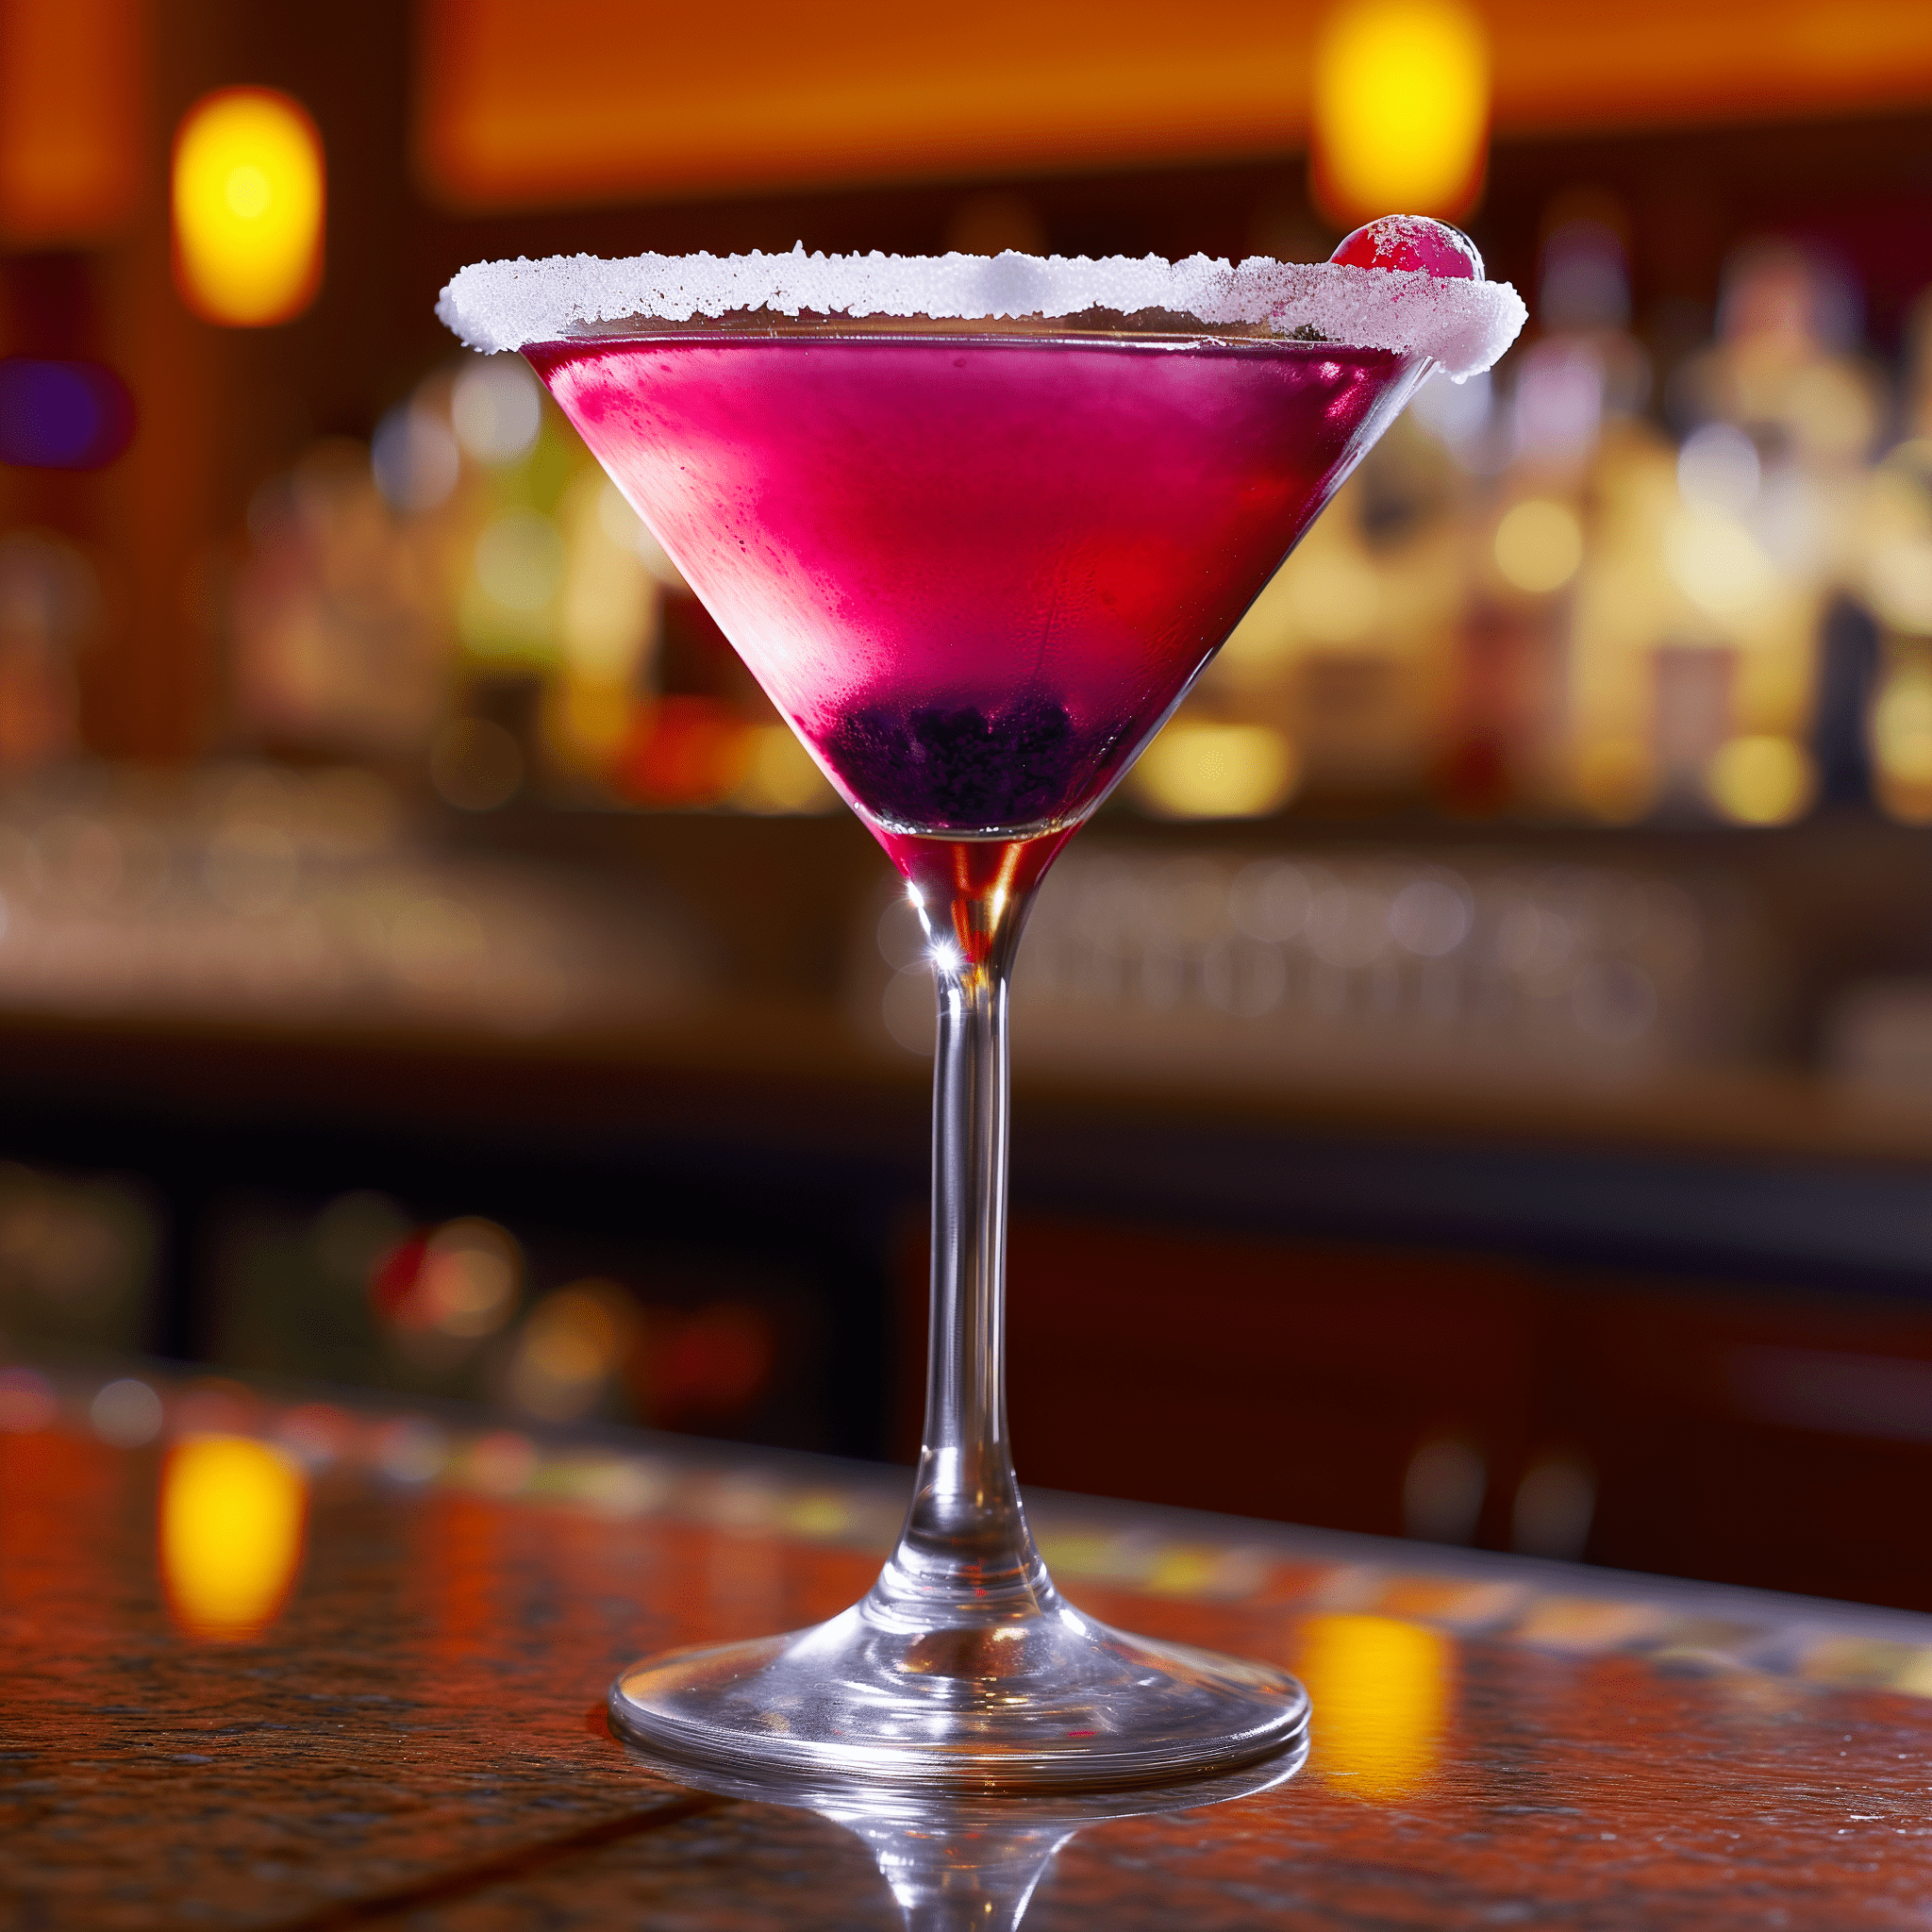 Blueberry Cosmo Mocktail Recipe - The Blueberry Cosmo Mocktail has a refreshing and tangy taste with a sweet undercurrent from the blueberry syrup. The lime juice adds a zesty citrus kick, while the cranberry juice provides a tart backbone to the drink. It's a well-balanced mocktail that is both invigorating and satisfying.